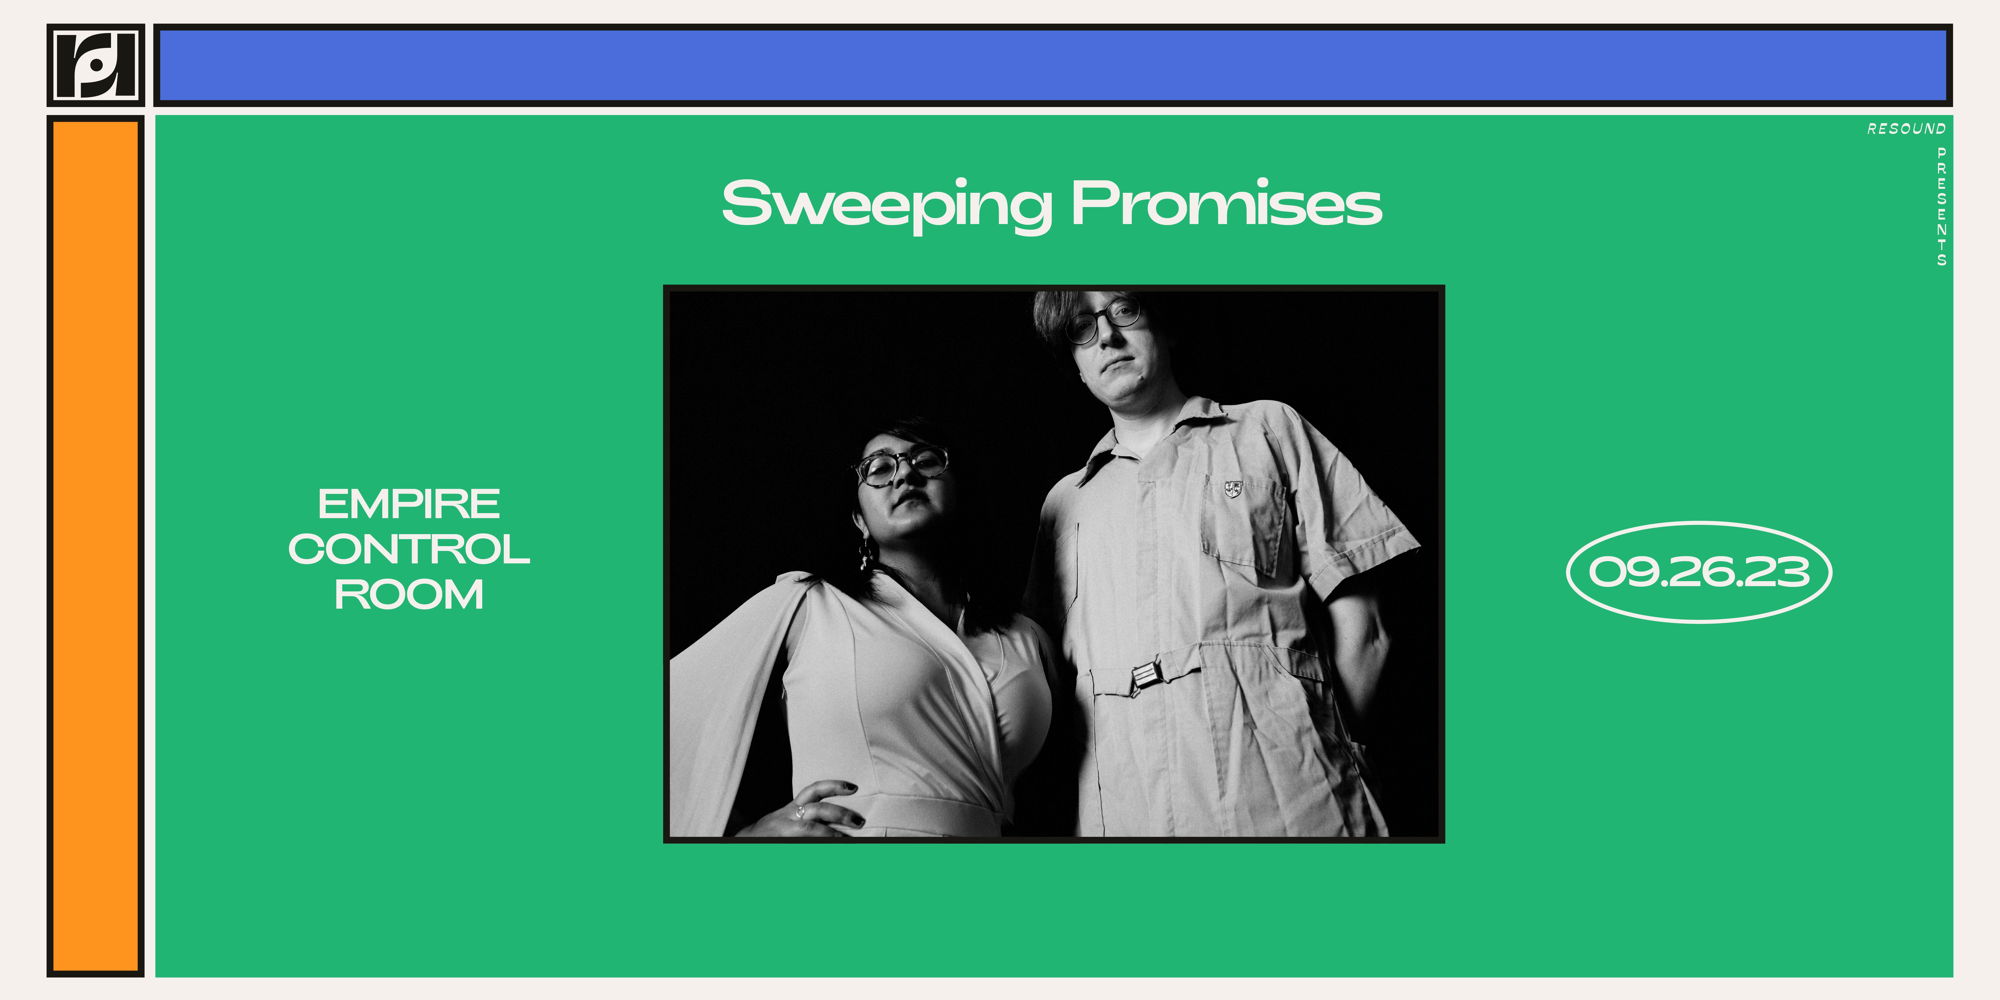 Resound Presents: Sweeping Promises at Empire Control Room promotional image